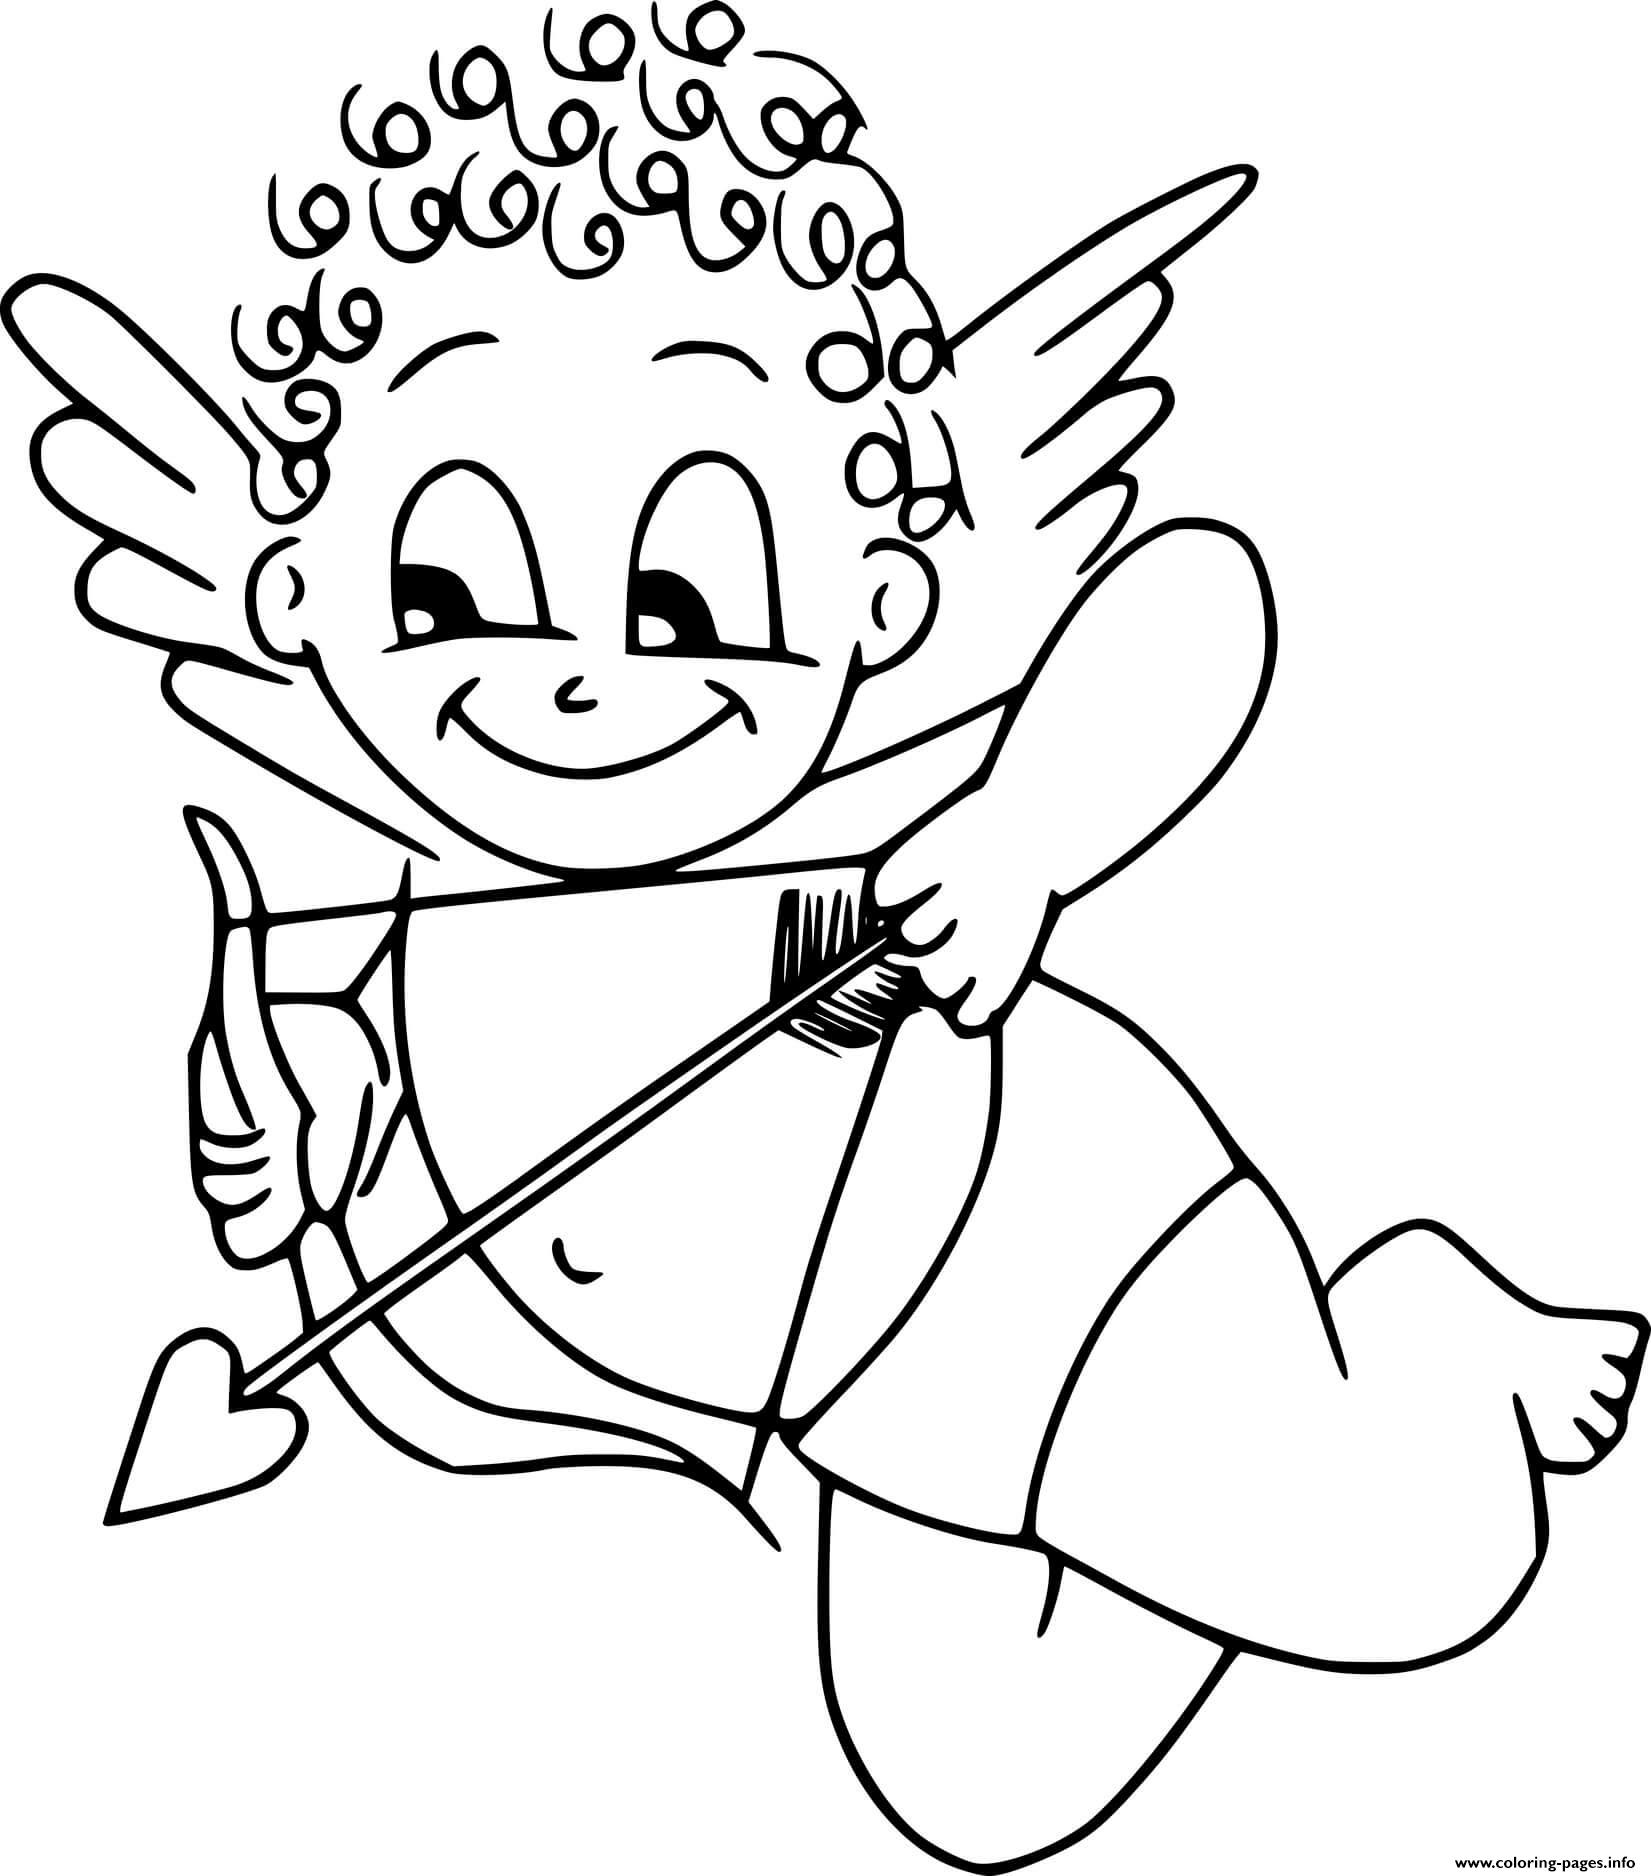 Curly Cupid coloring